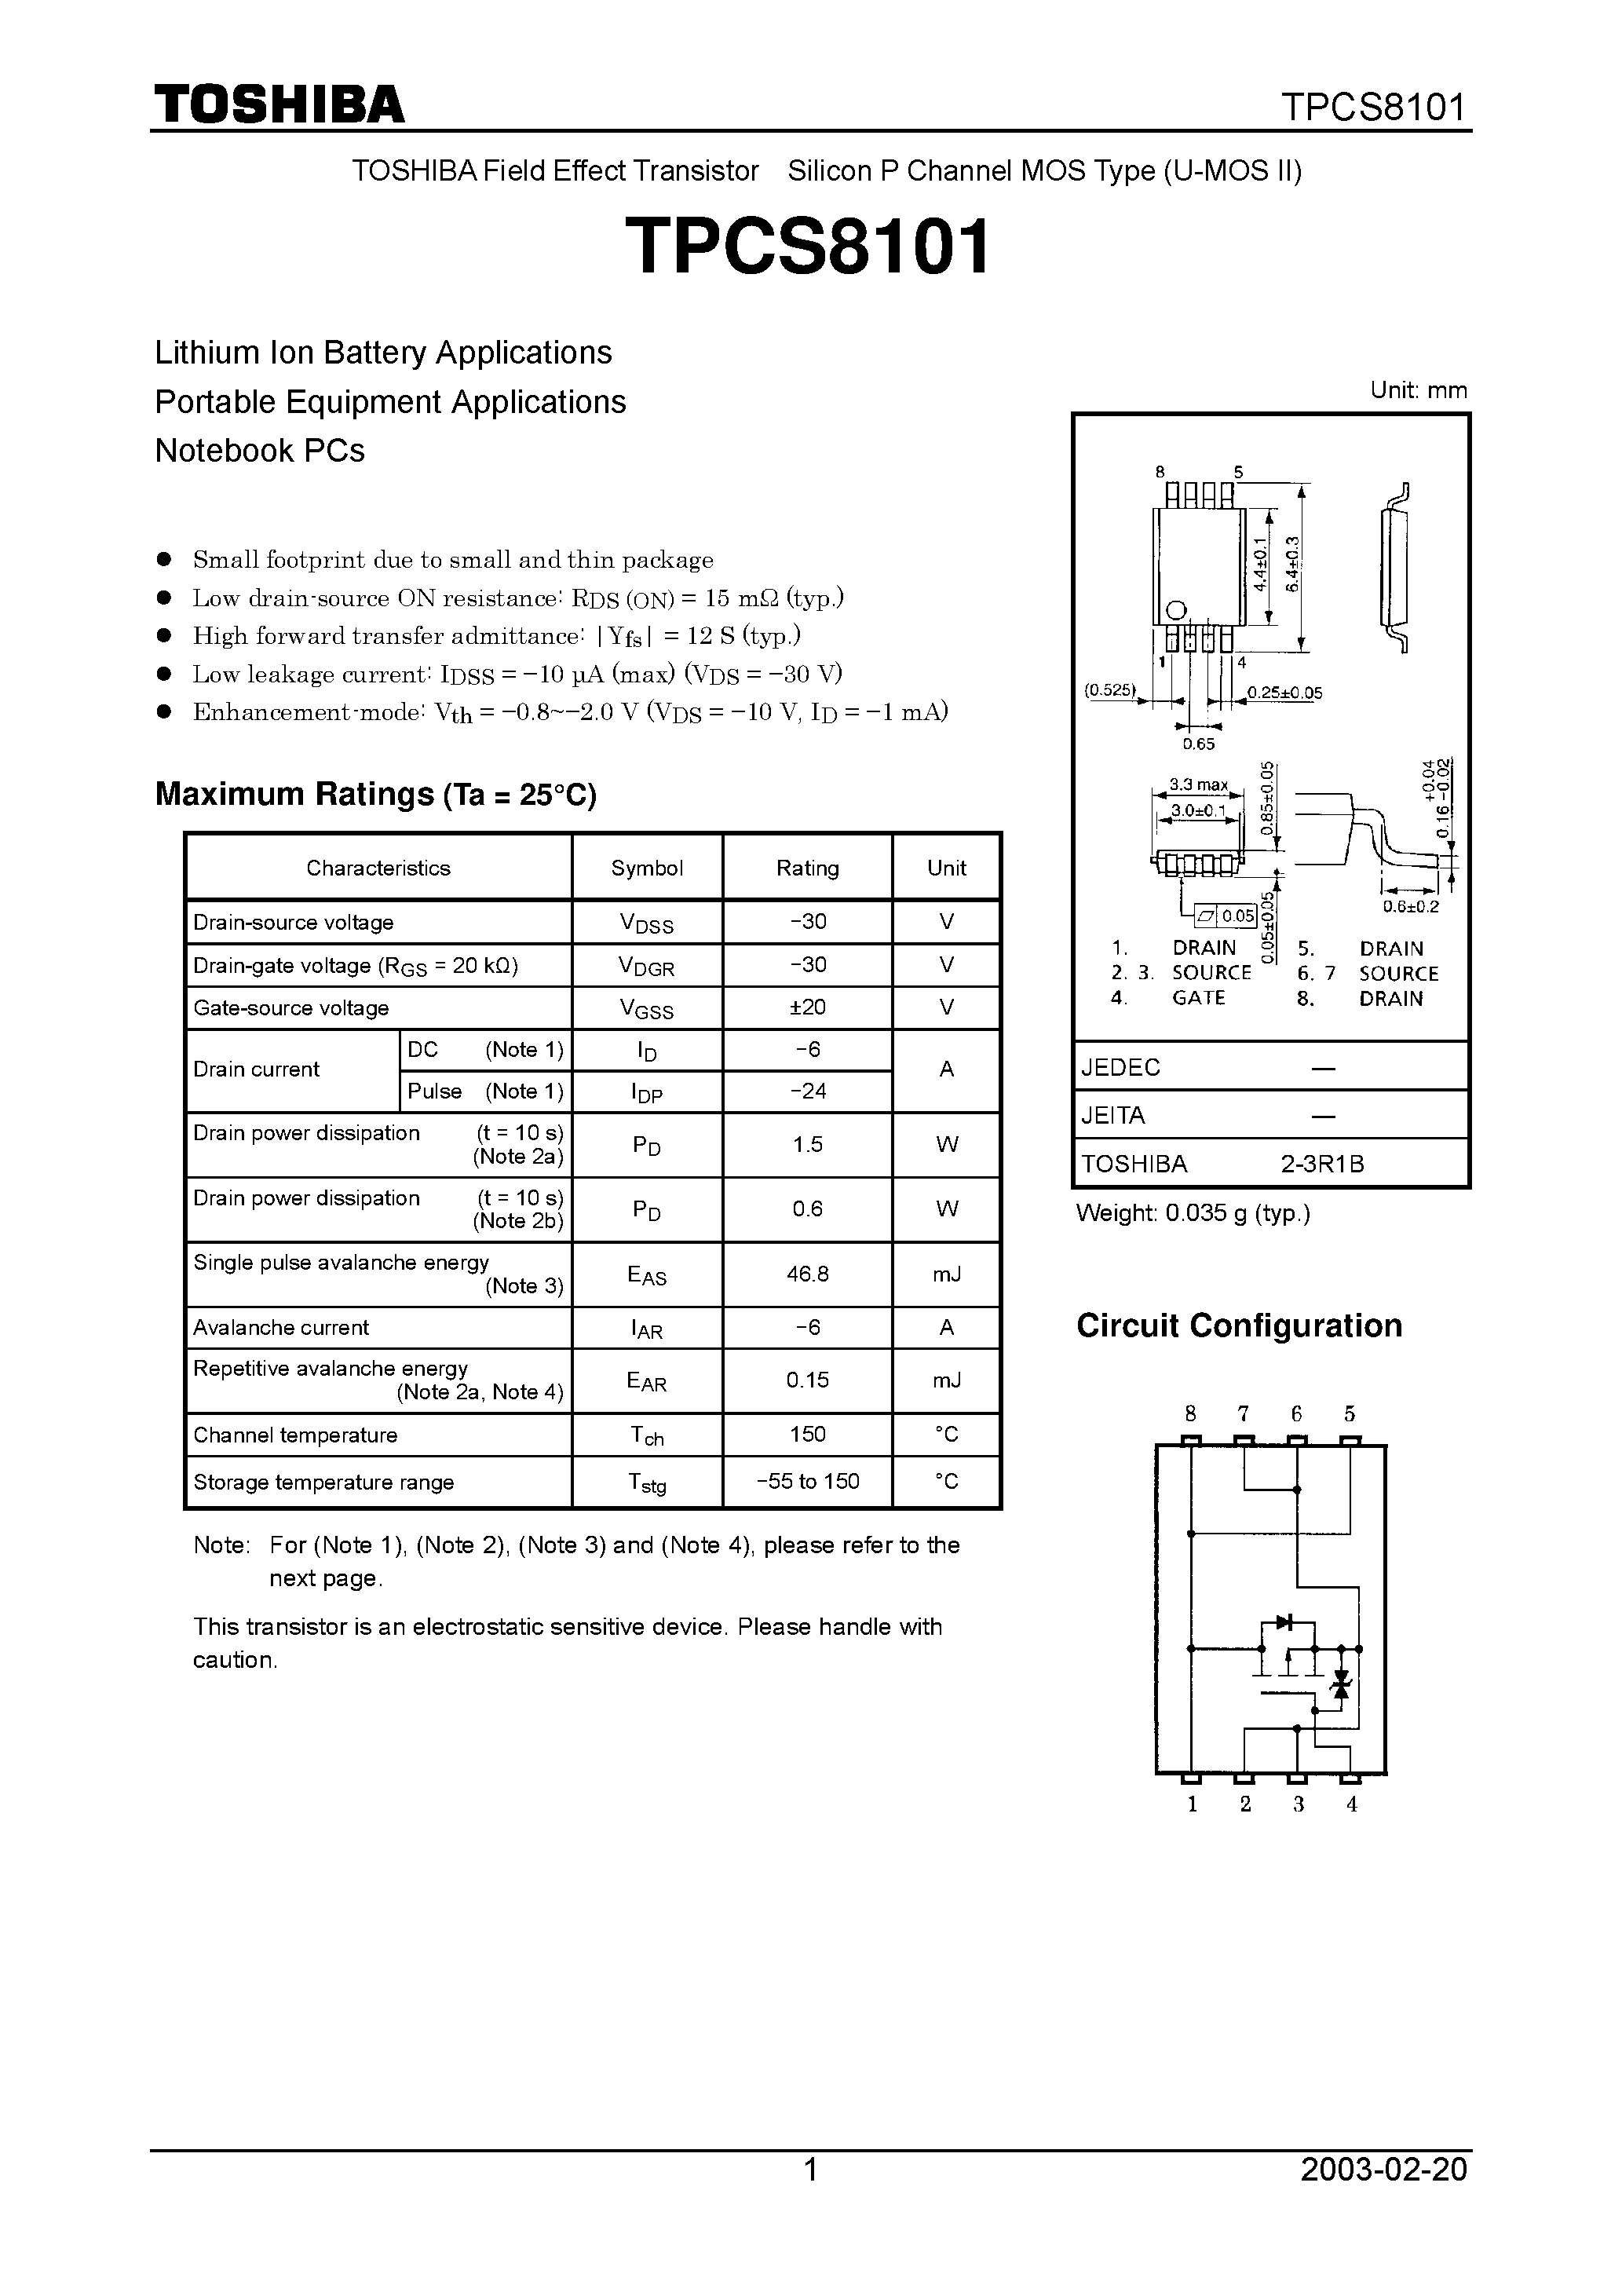 Datasheet TPCS8101 - Effect Transistor Silicon P Channel MOS Type (U-MOS II) page 1